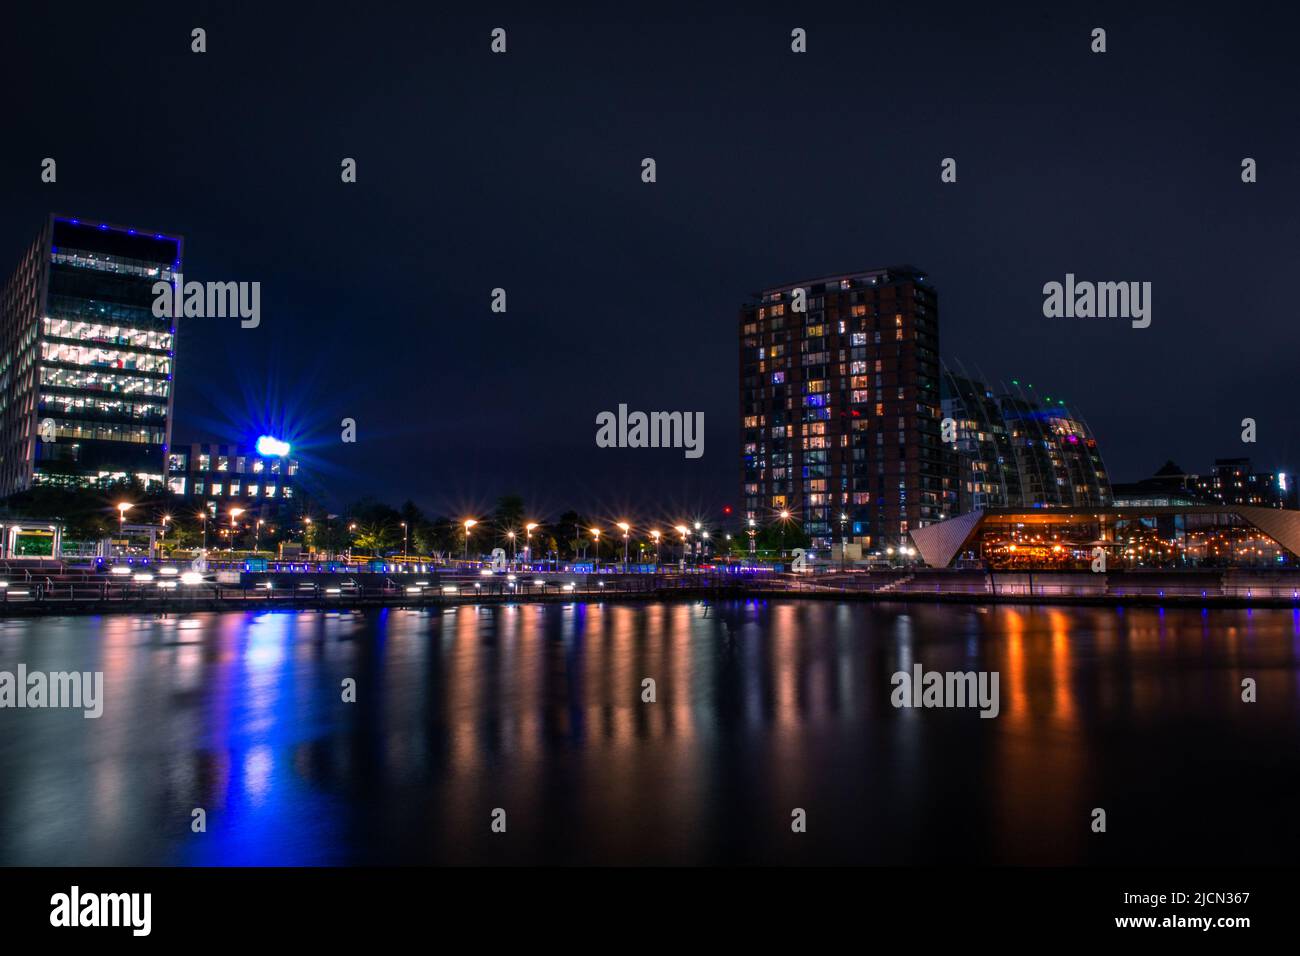 MediaCity UK, ITV and Metrolink at night, located in Salford Quays, Manchester, Greater Manchester, United Kingdom, Stock Photo